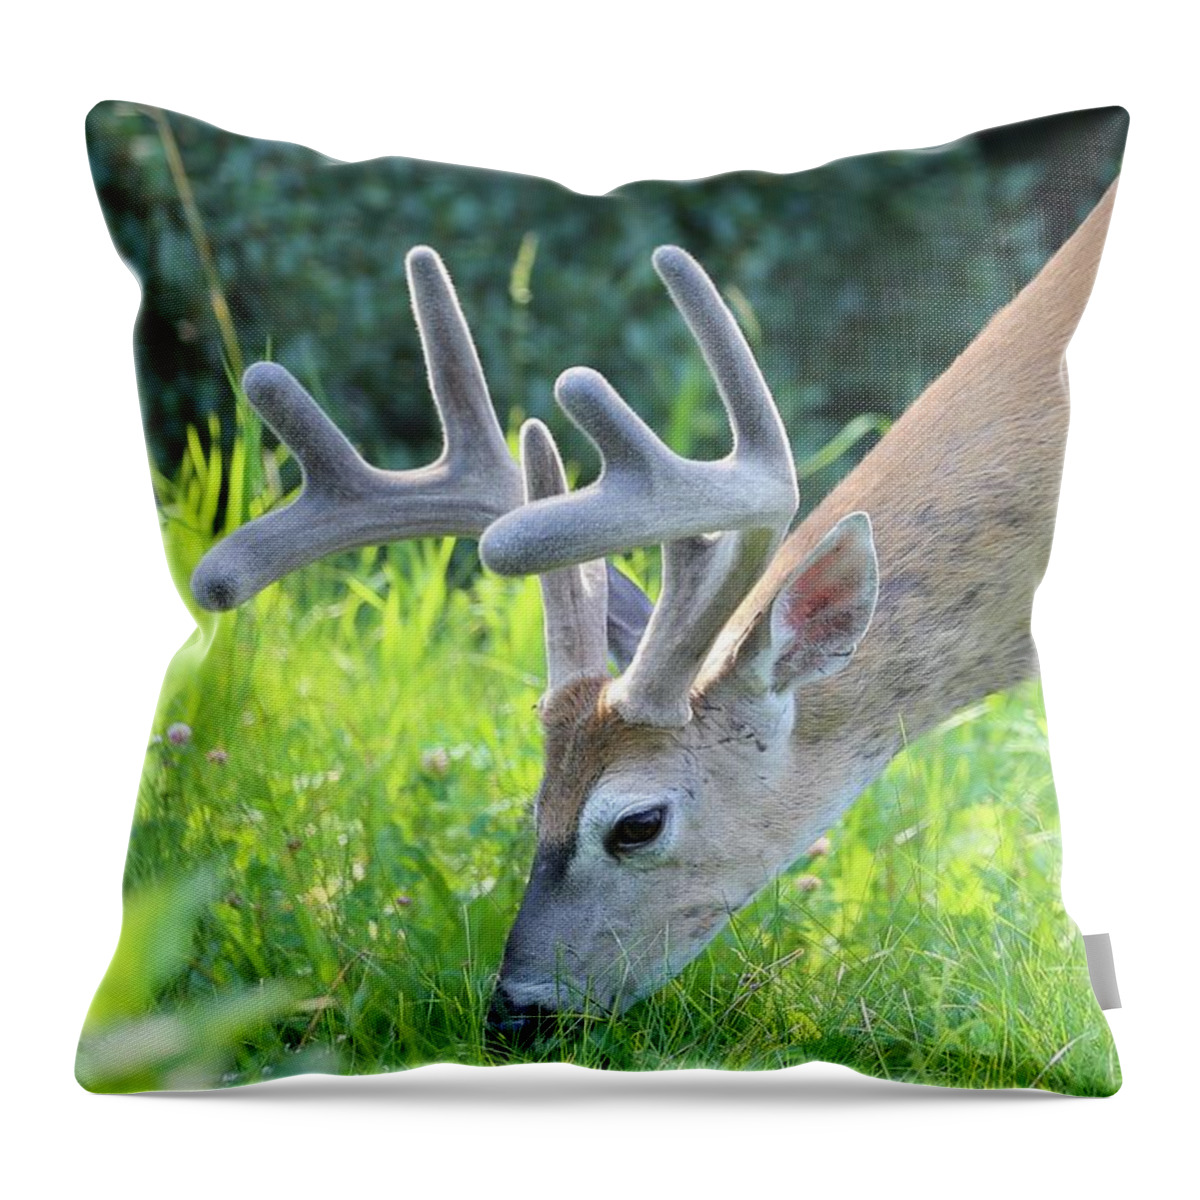 Stag Throw Pillow featuring the photograph Grazing Mule Deer by Carol Groenen